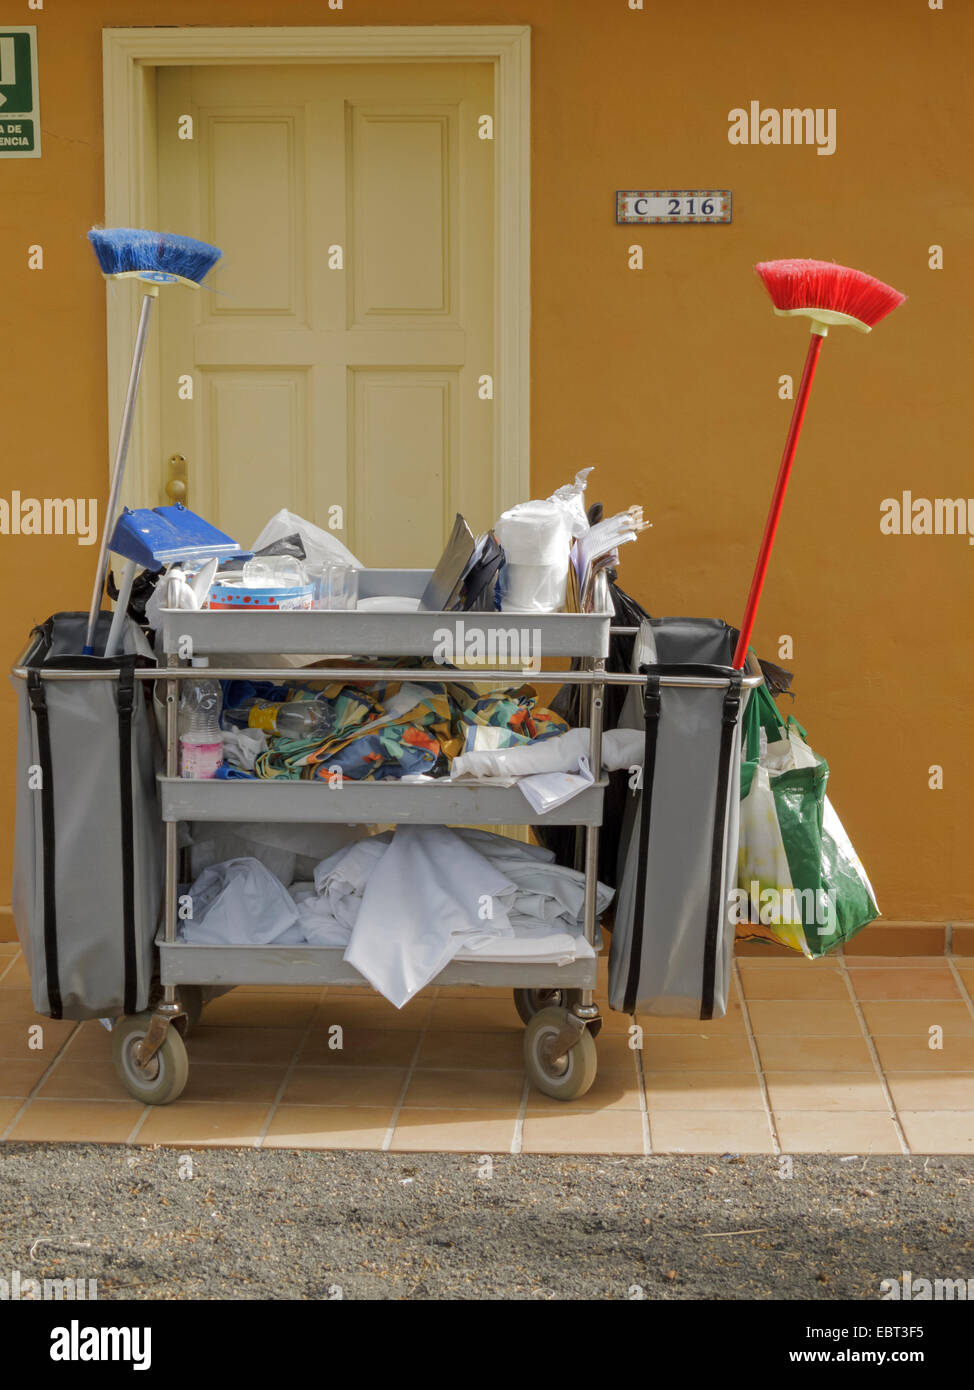 cleaning Trolley: Over 2,827 Royalty-Free Licensable Stock Photos